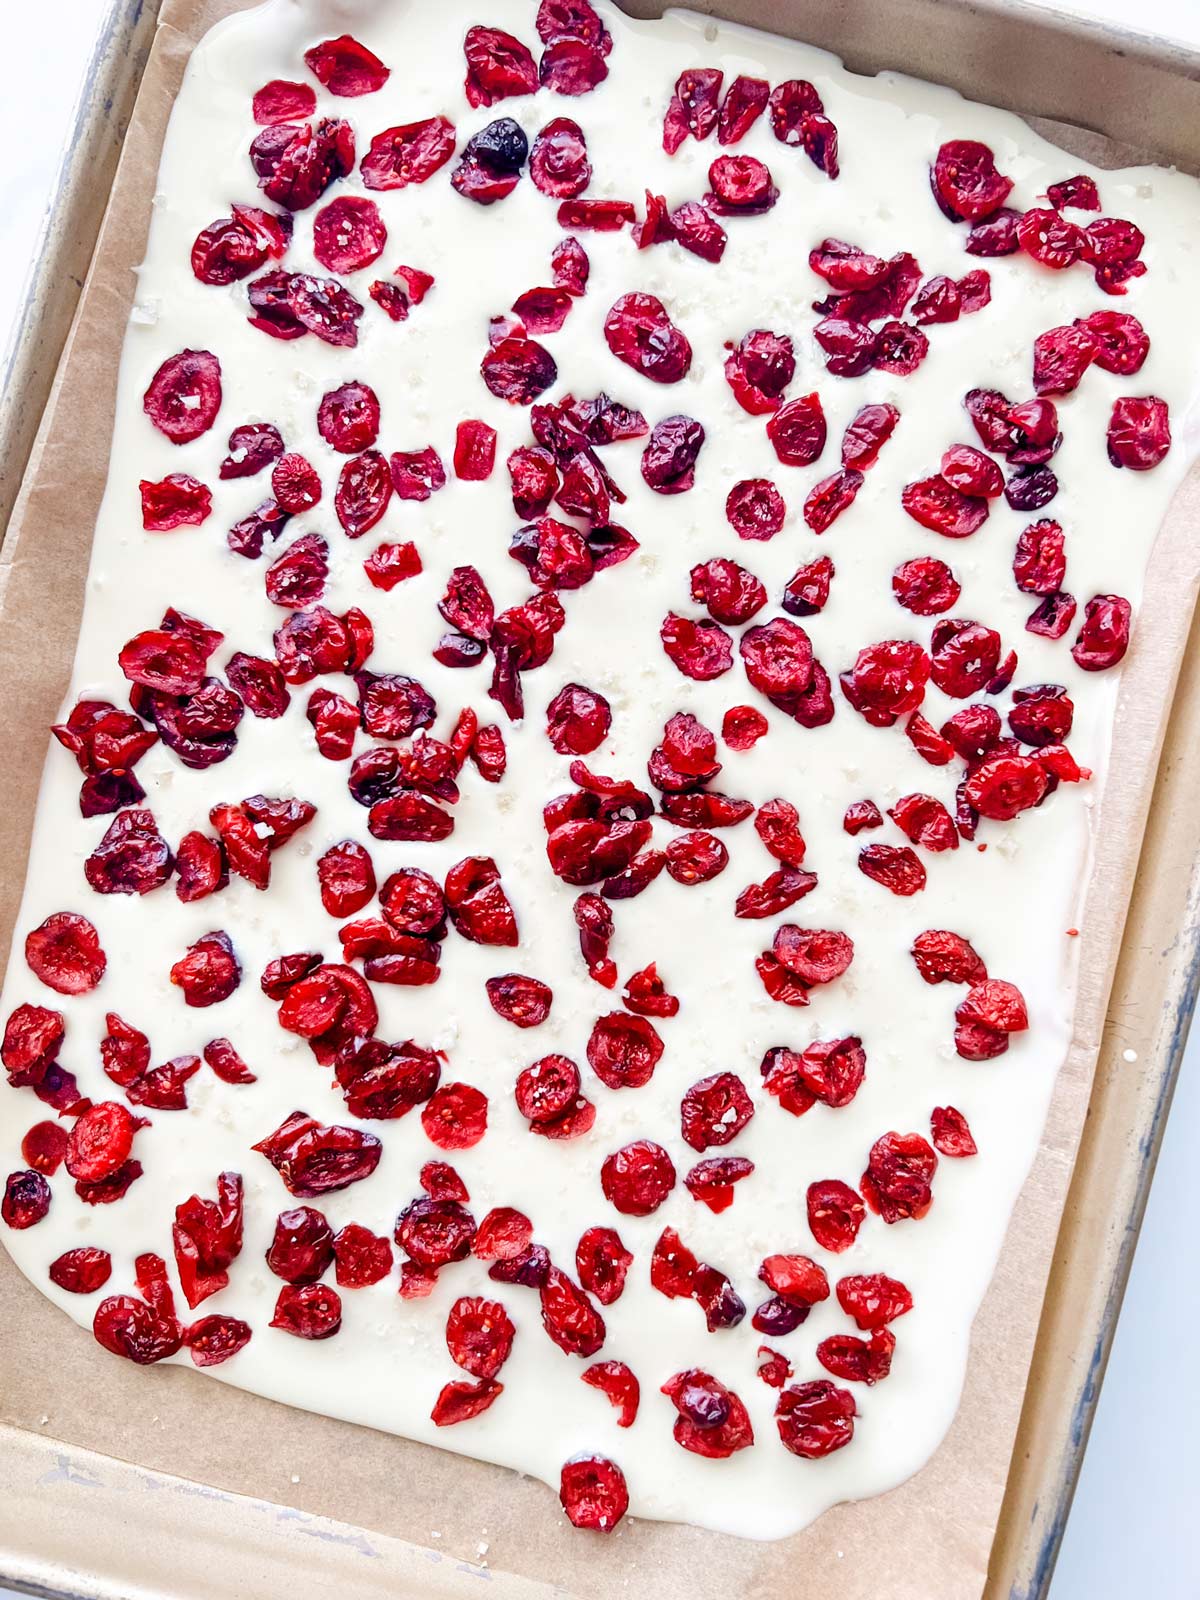 Photo of white chocolate bark that has hardened and is ready to break apart.